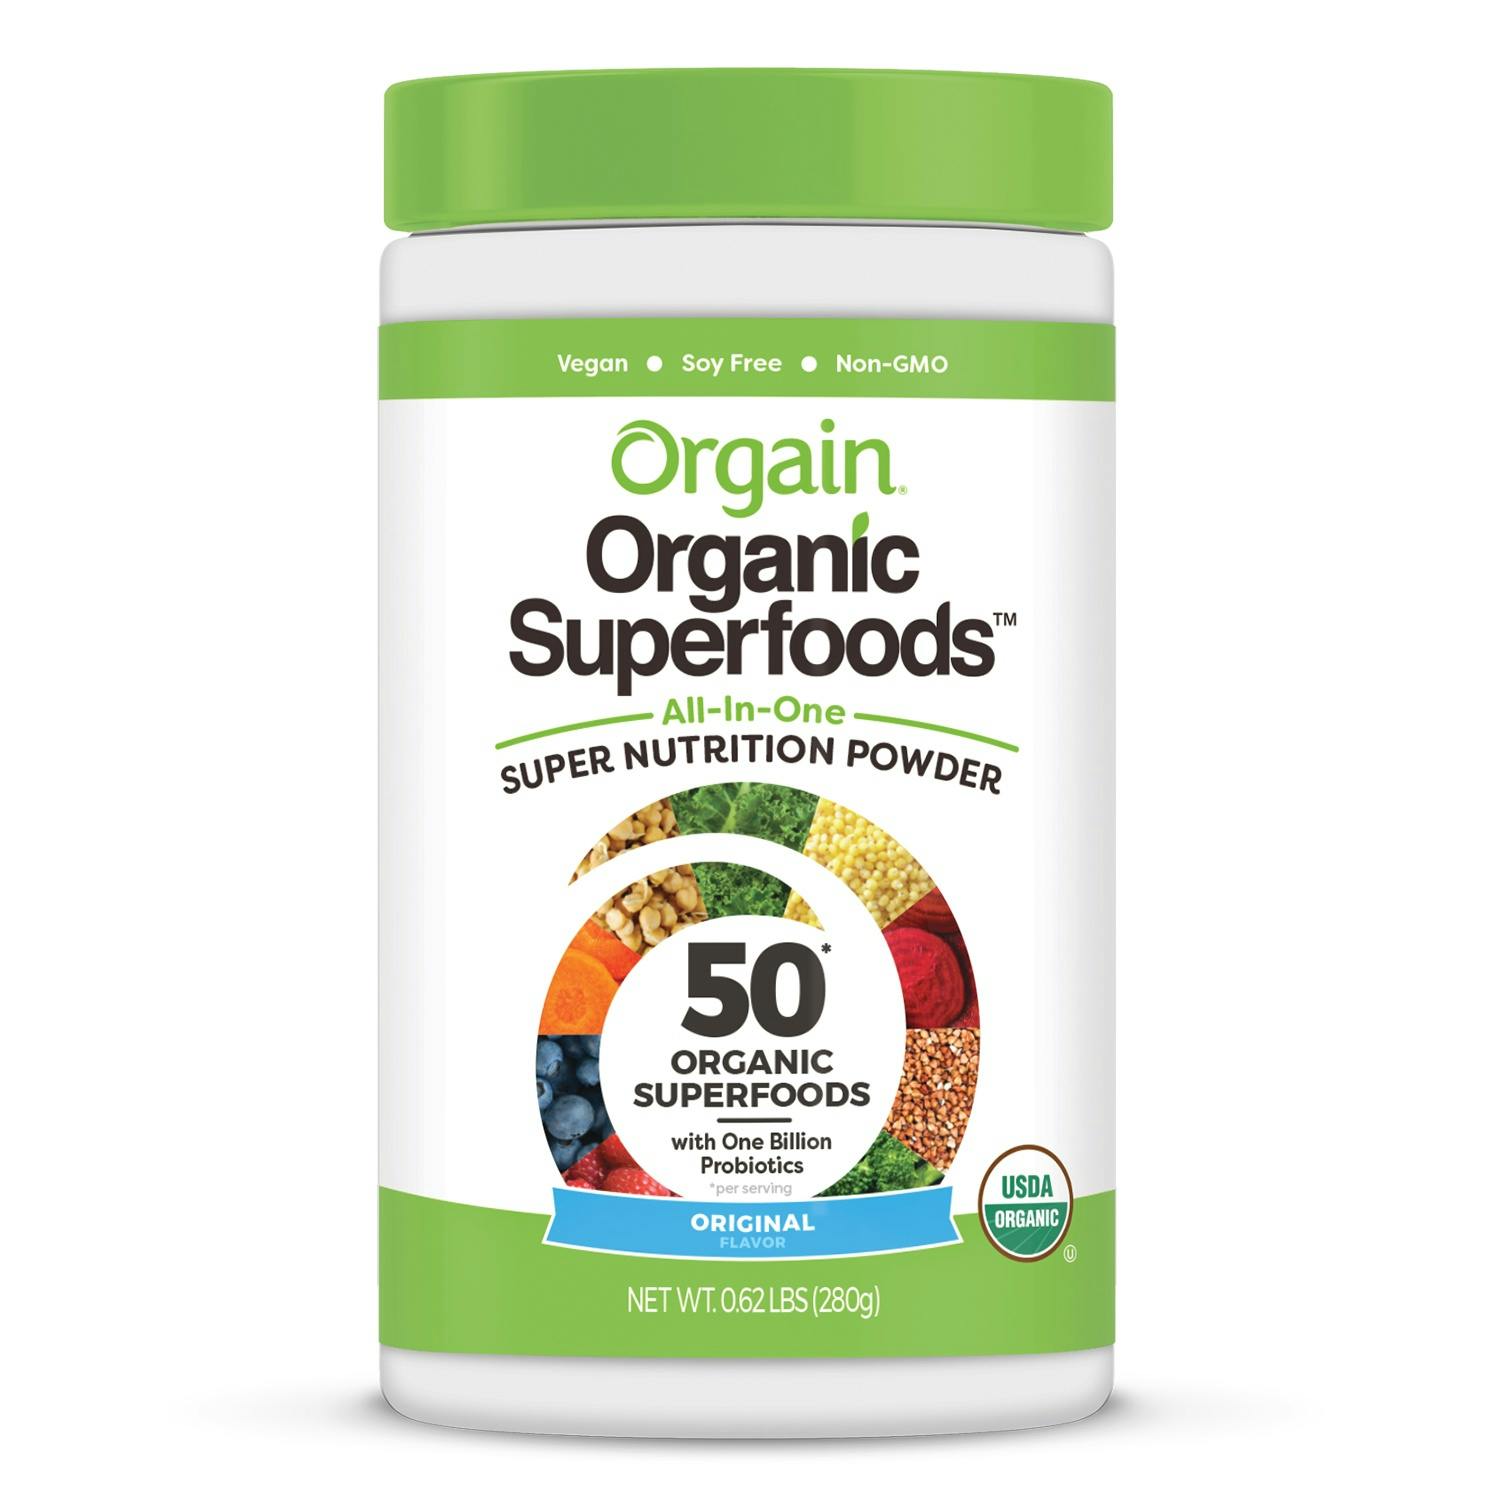 Orgain Organic Superfoods All-In-One Super Nutrition Powder, 851770003971, Original Flavor - 0.62 lb Canister